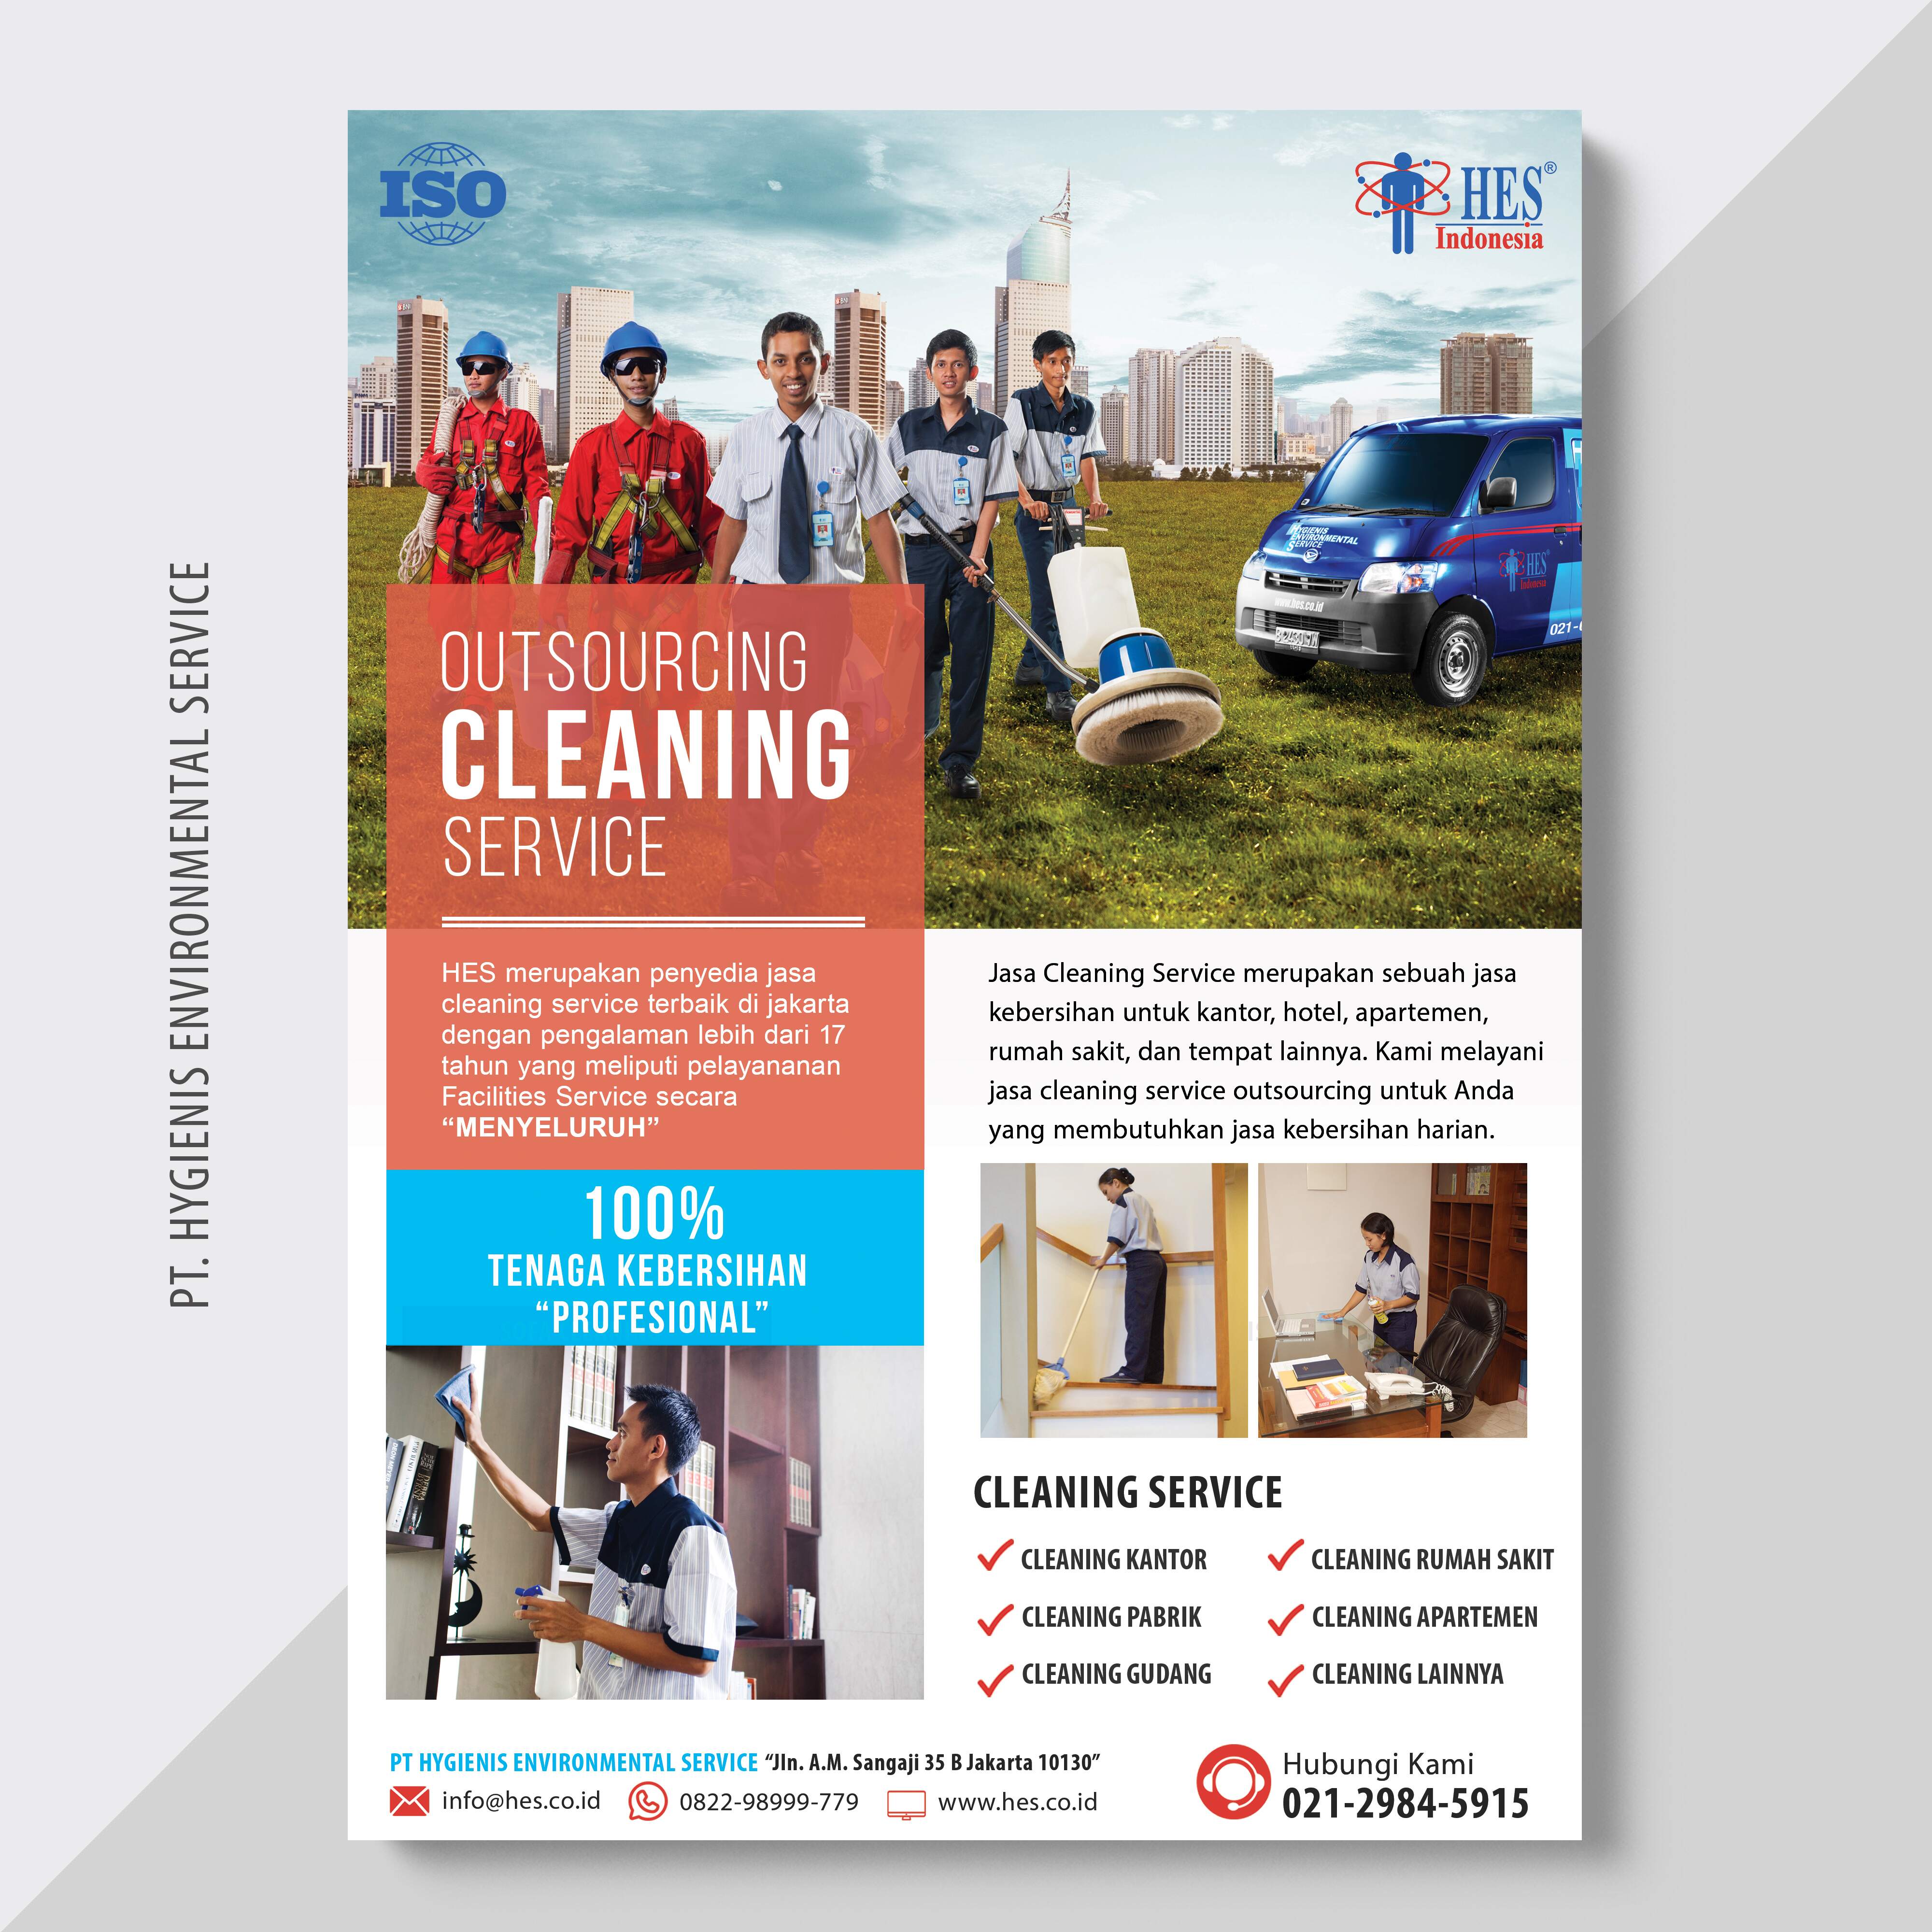 Outsourcing Cleaning Service